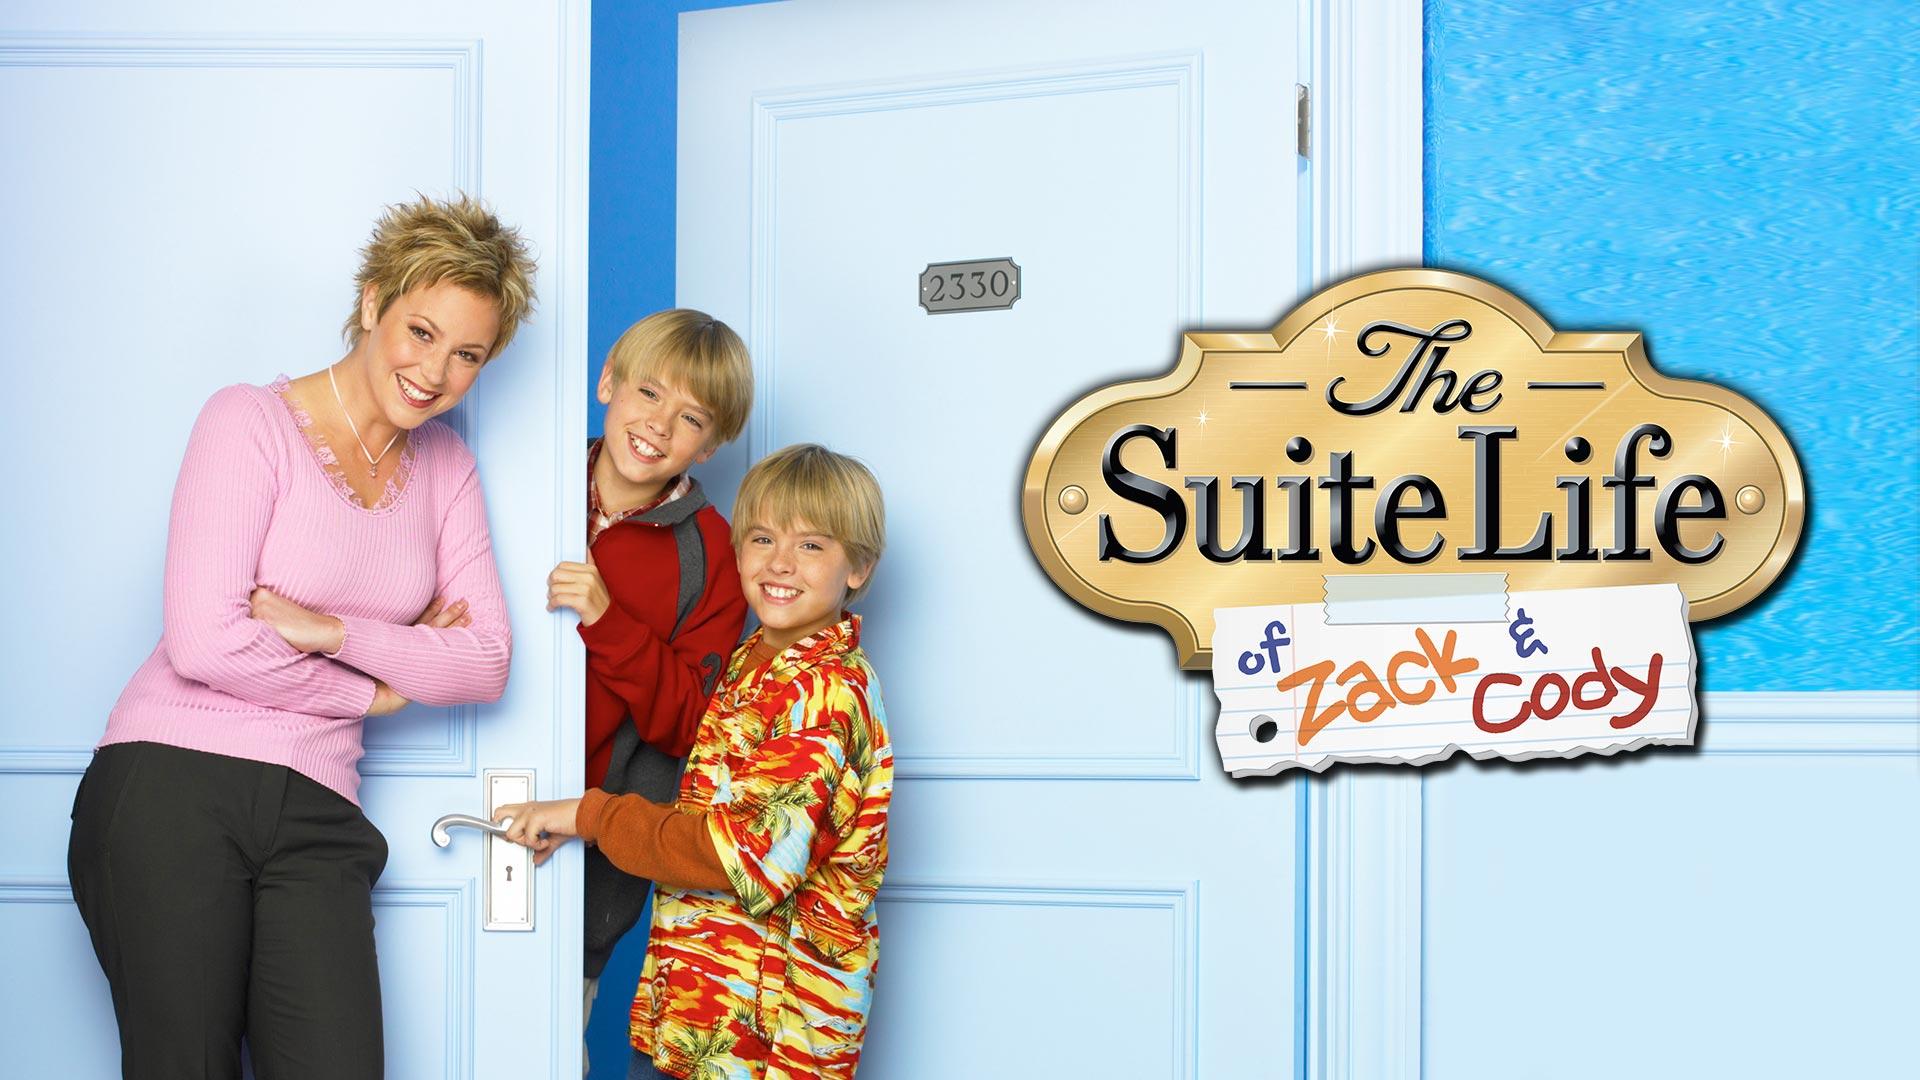 The Suite Life Of Zack & Cody Comedy Series, now streaming on Disney+ Hotstar